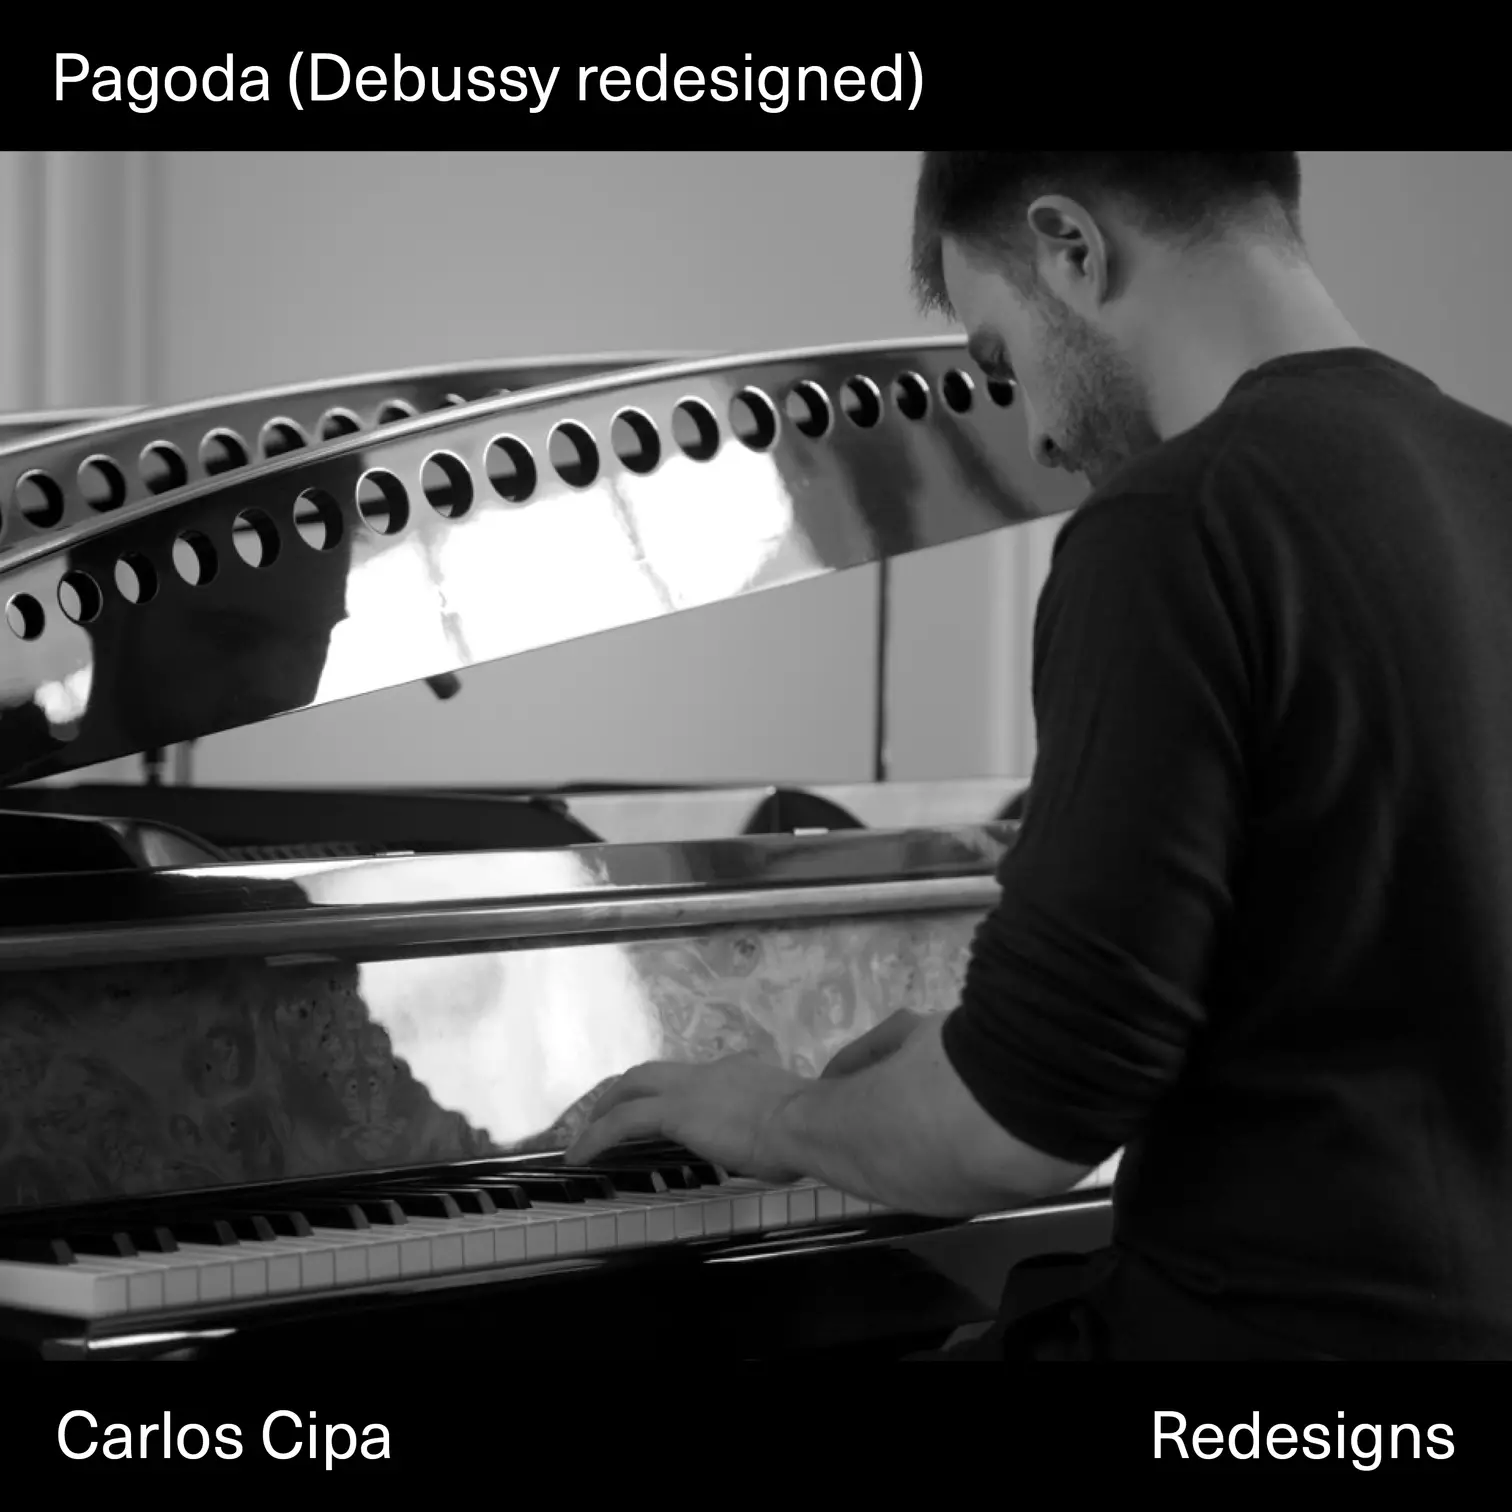 Pagoda (Debussy redesigned)